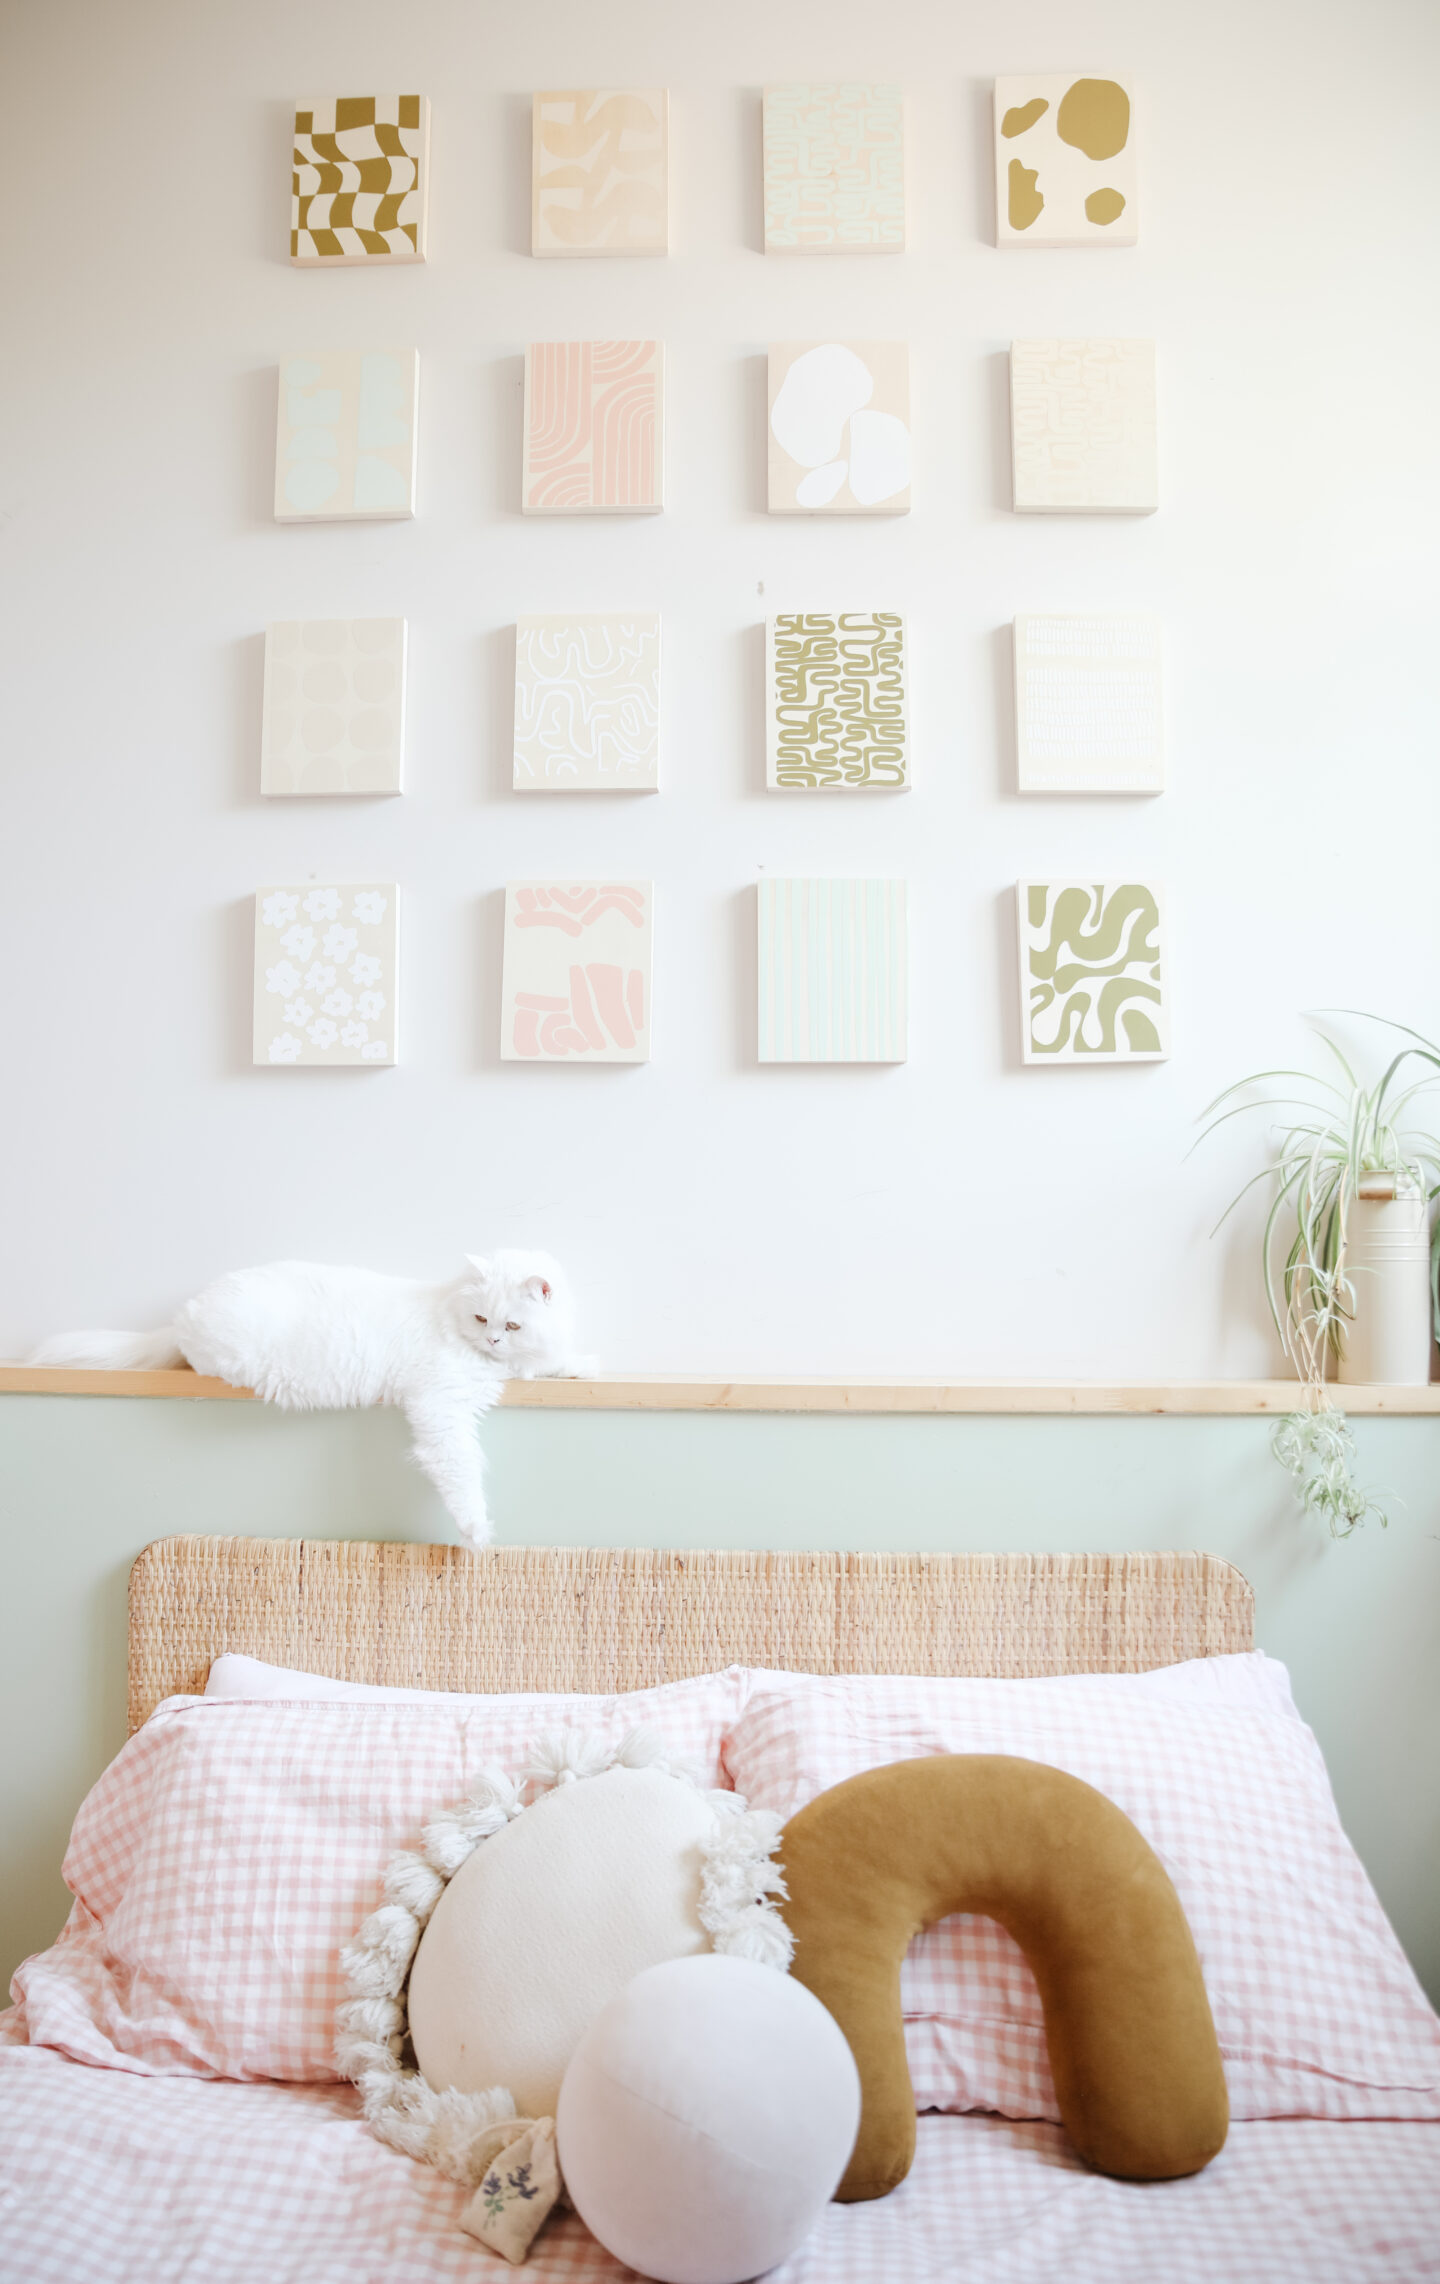 How to design your own gallery wall at home